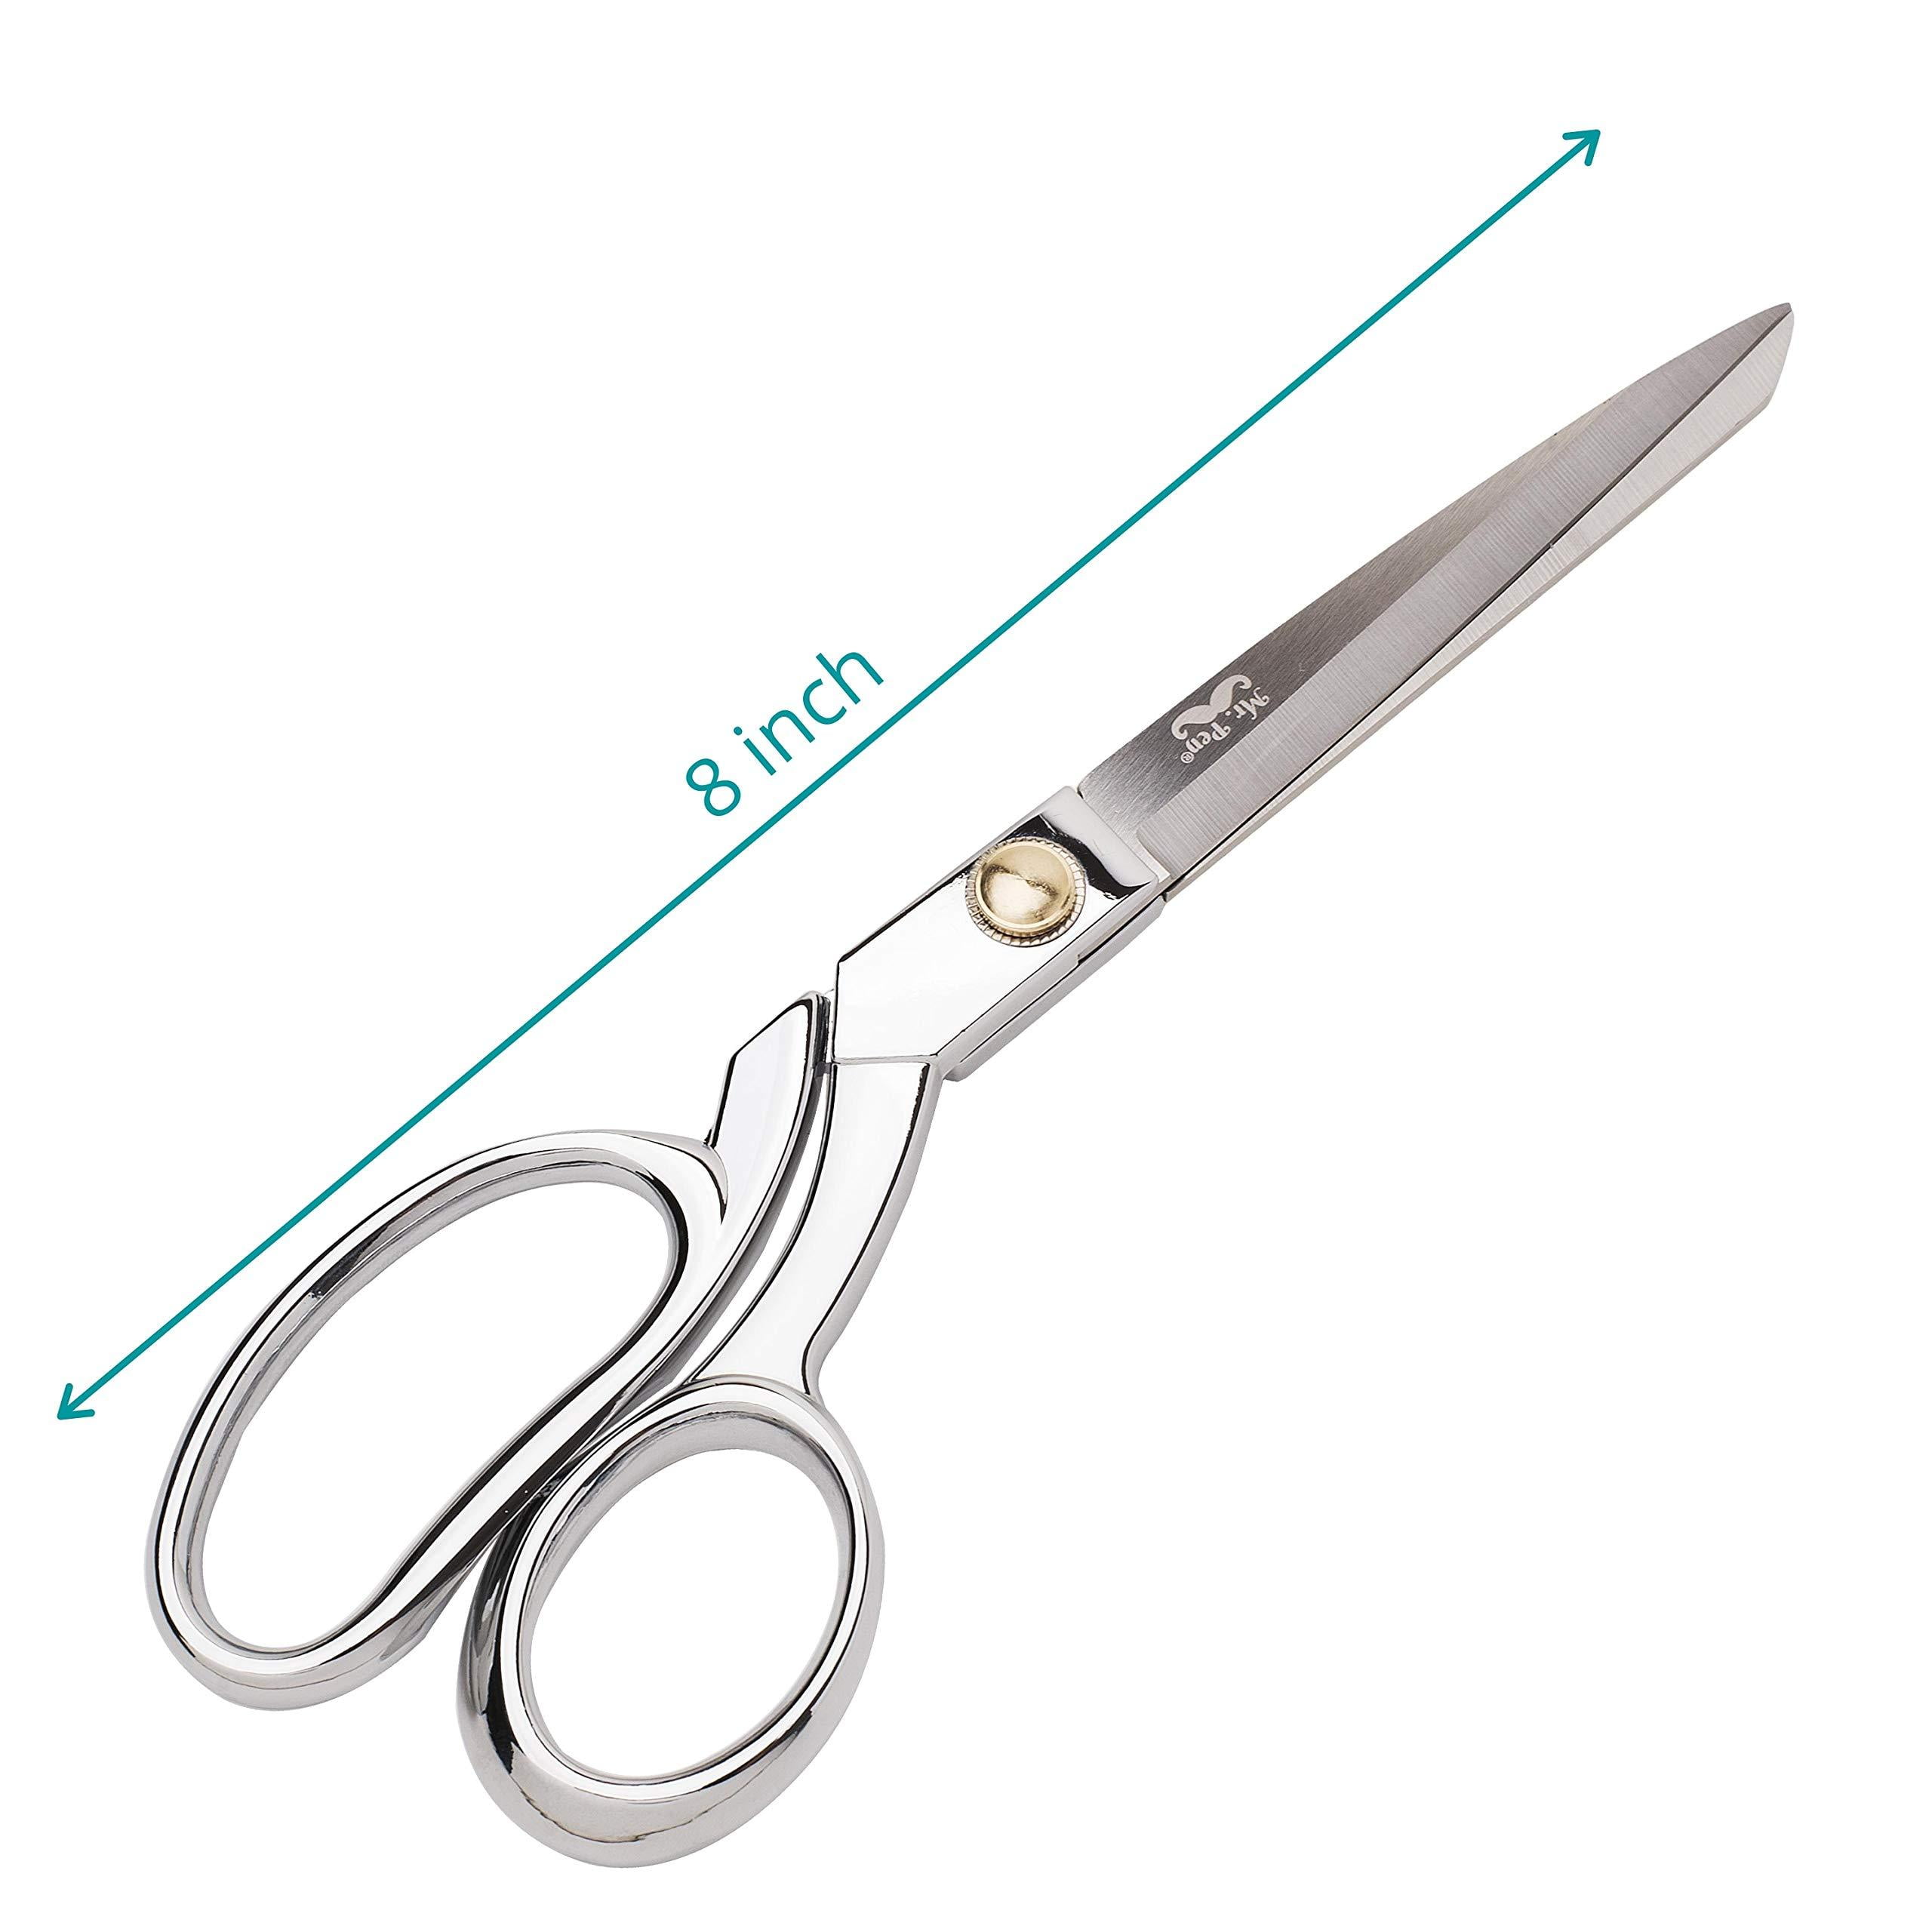 Portable Mini Sewing Scissors For Cross Stitch, Clothing, And More  Multicolor Options Available From Jkcz, $0.08